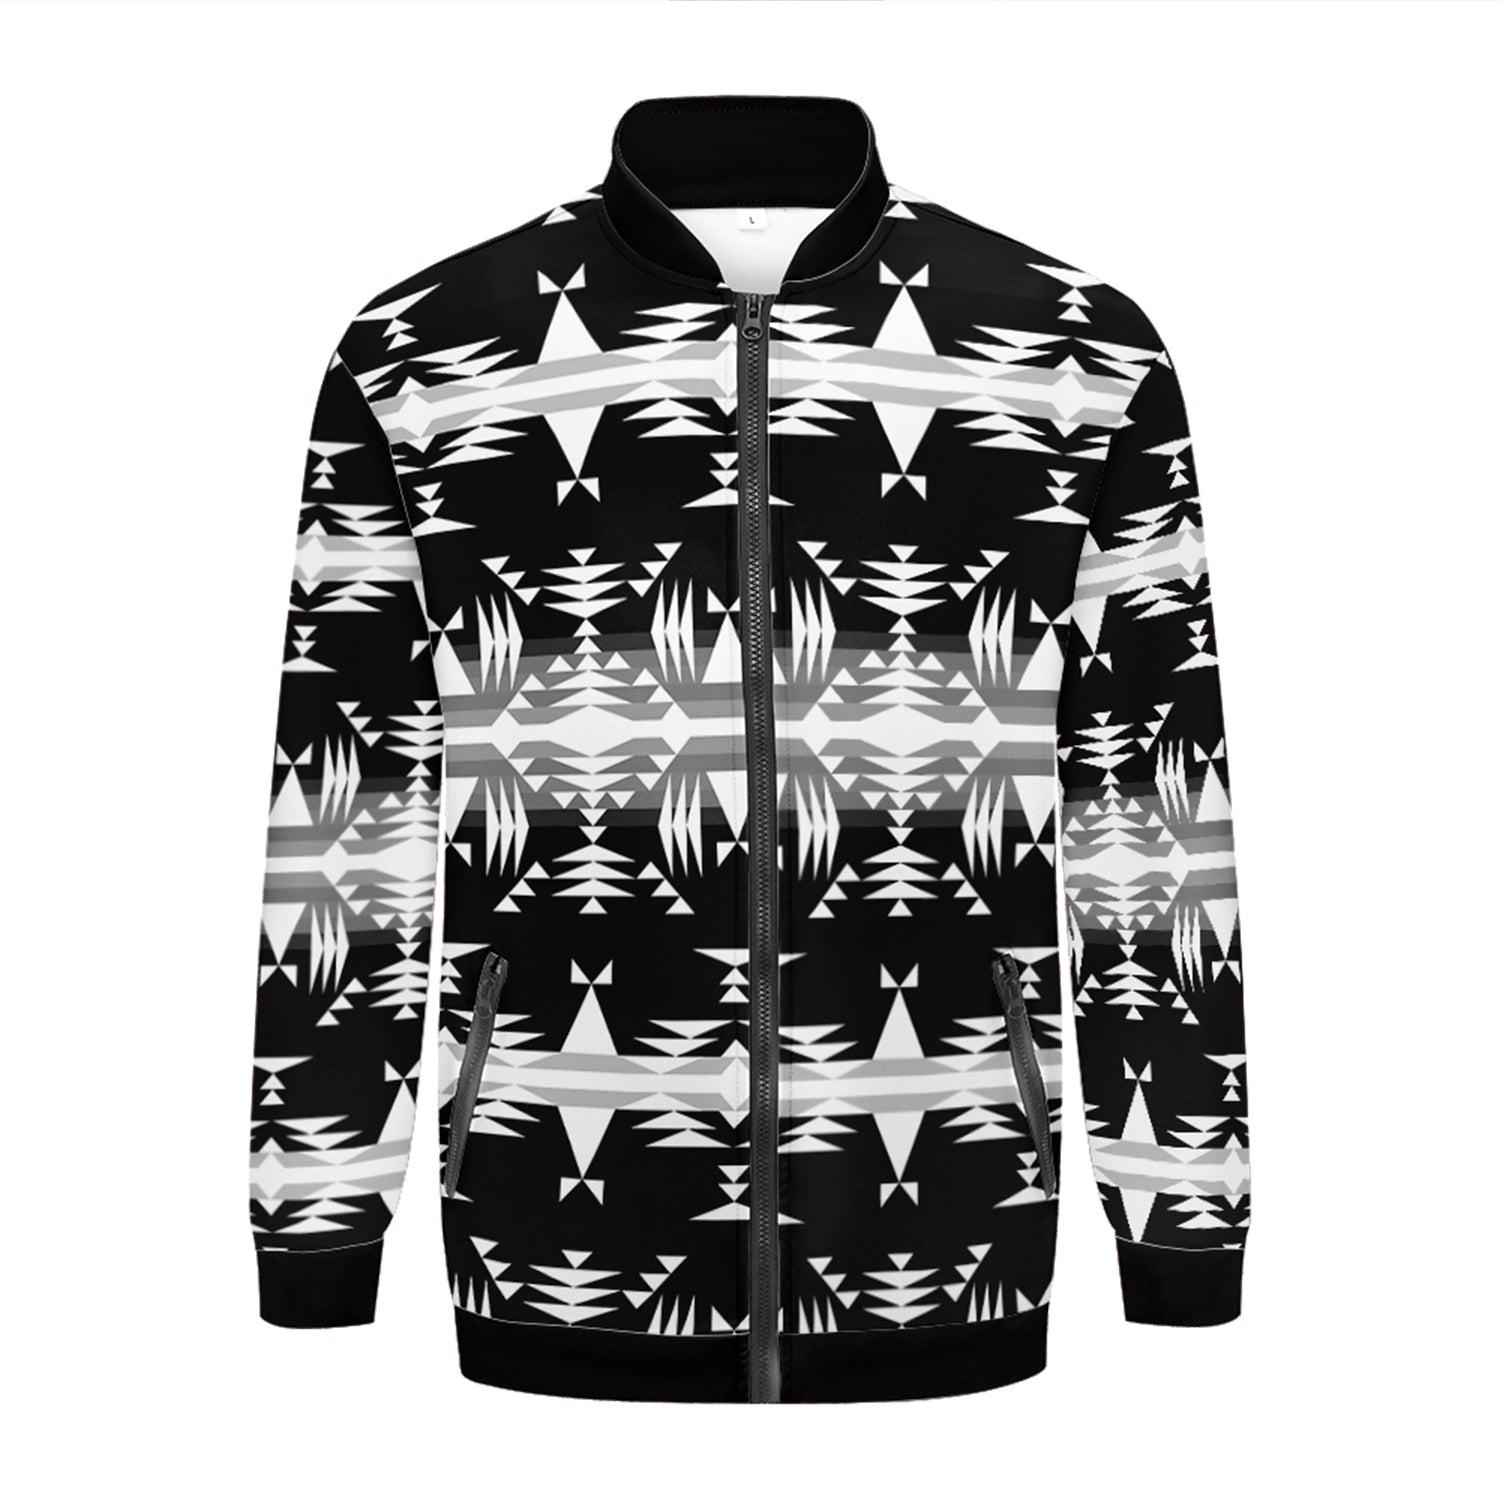 Between the Mountains Black and White Youth Zippered Collared Lightweight Jacket